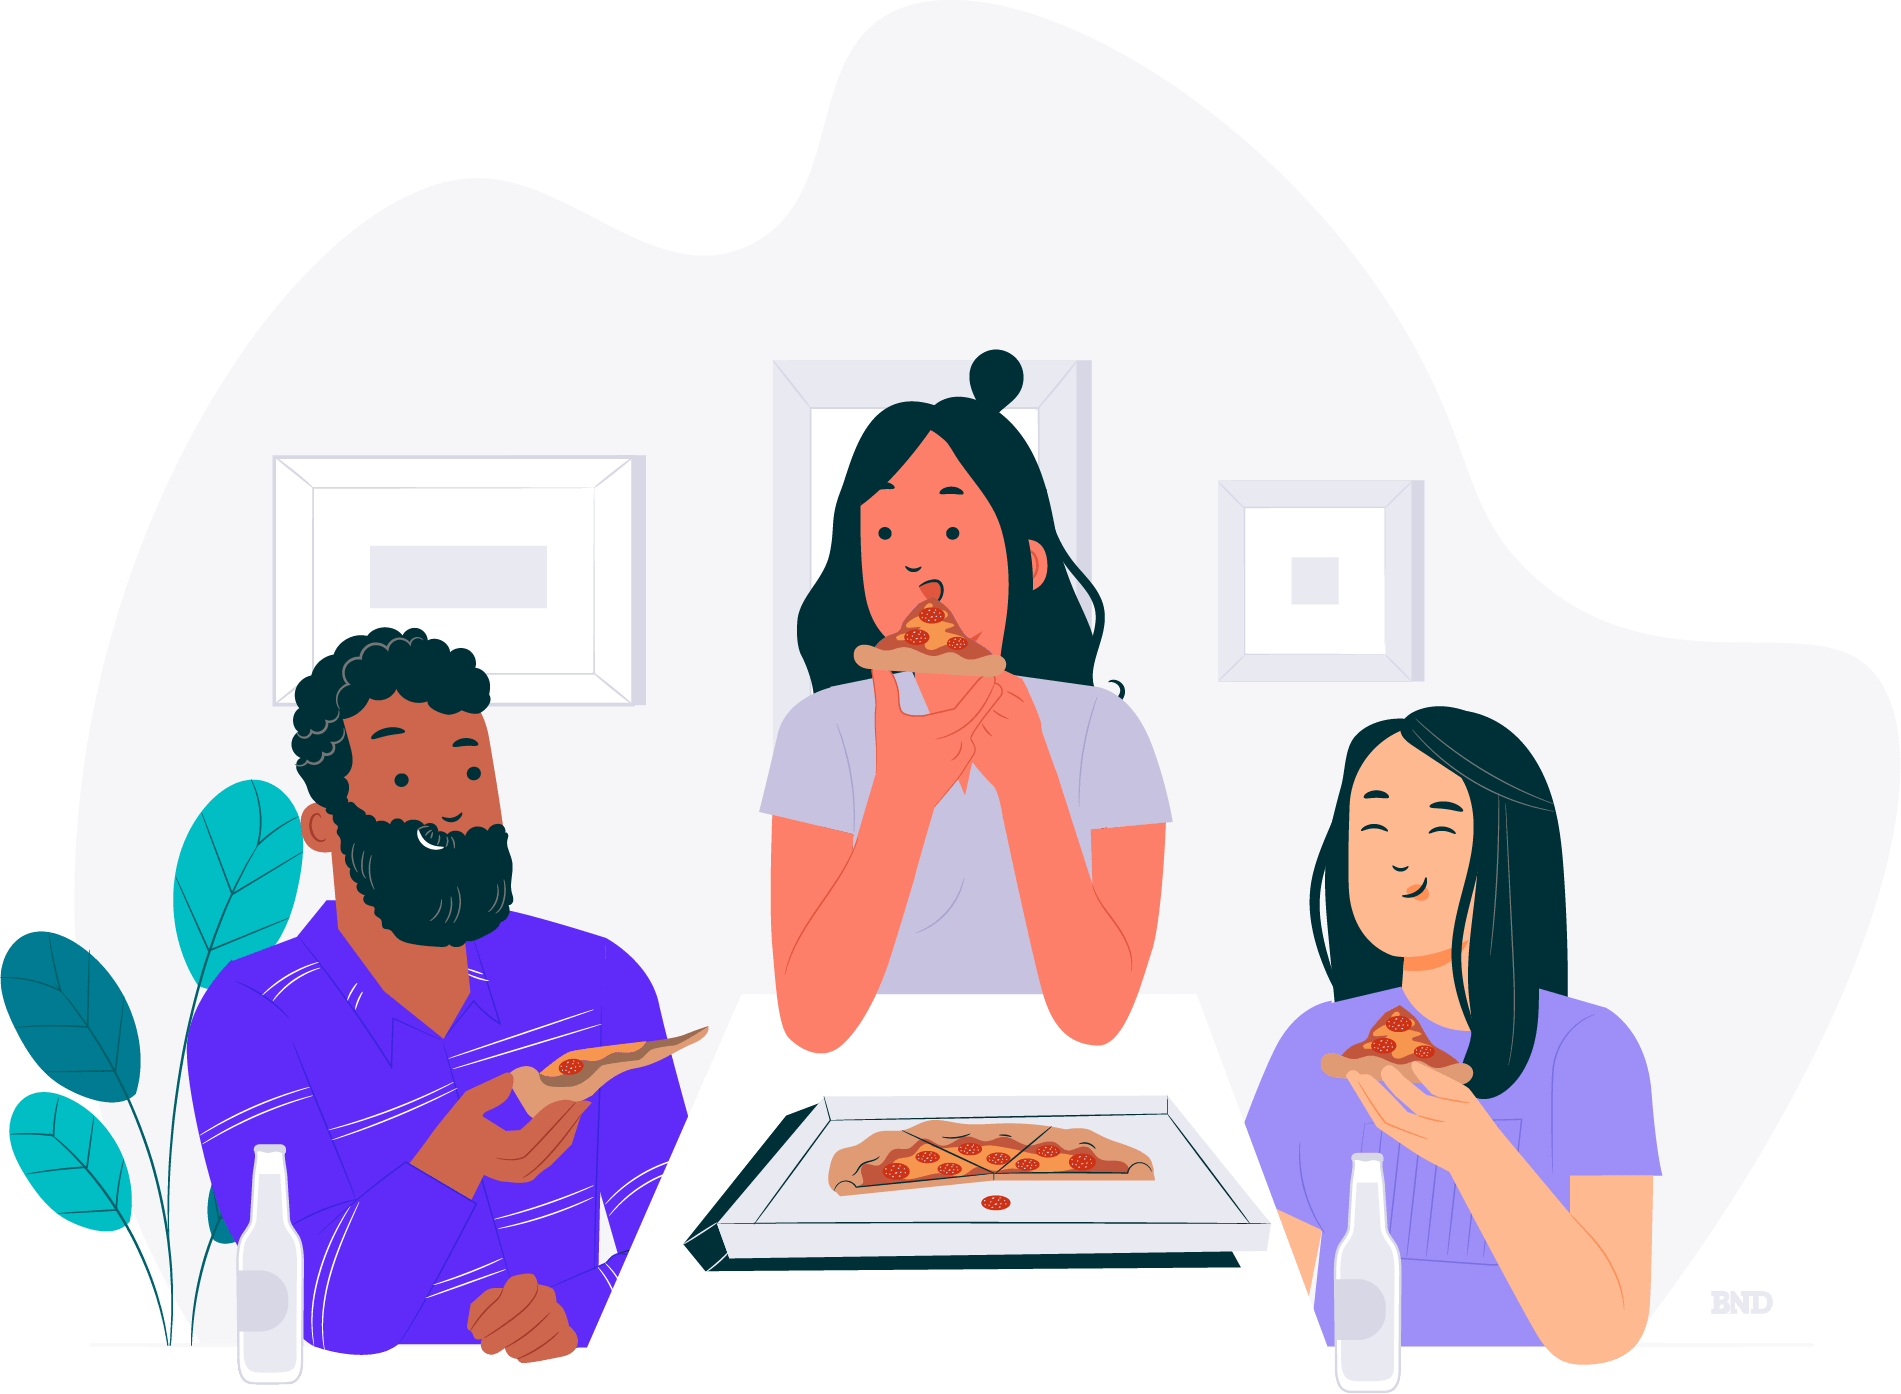 graphic of colleagues eating pizza together